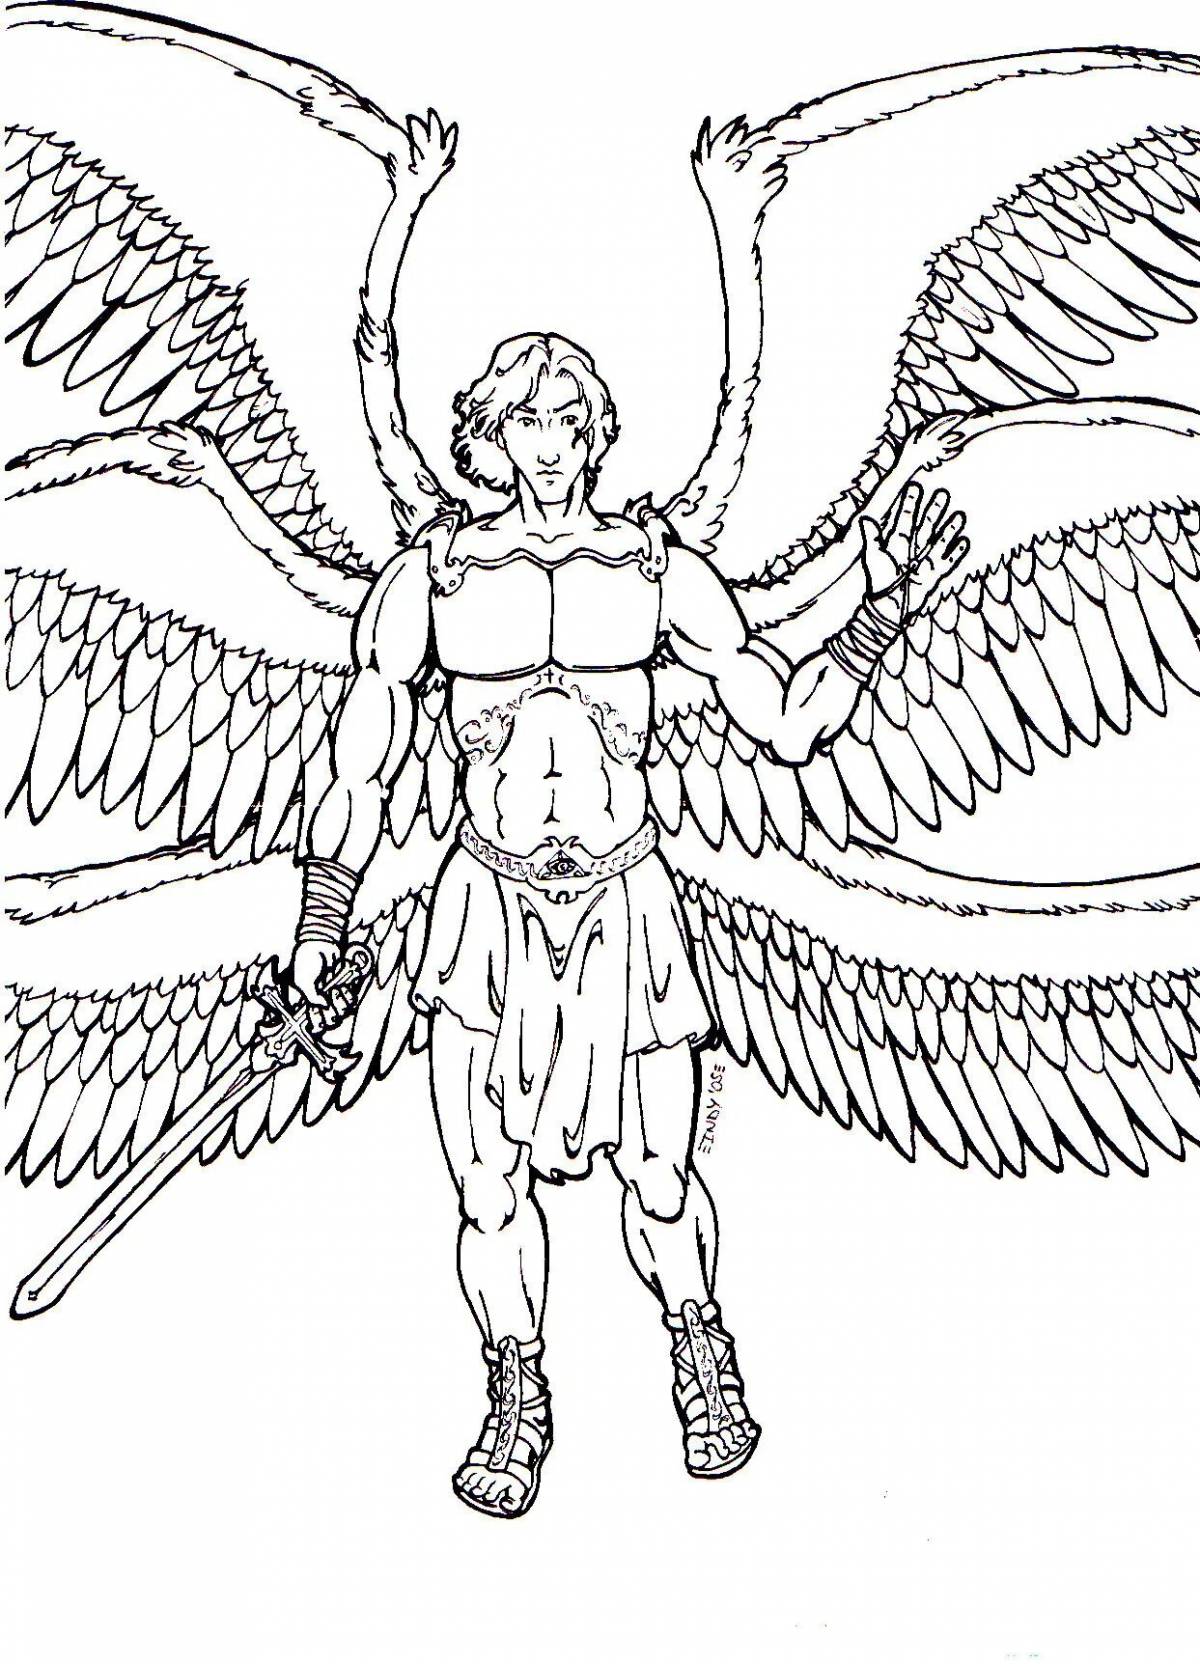 Coloring page dazzling archangel michael